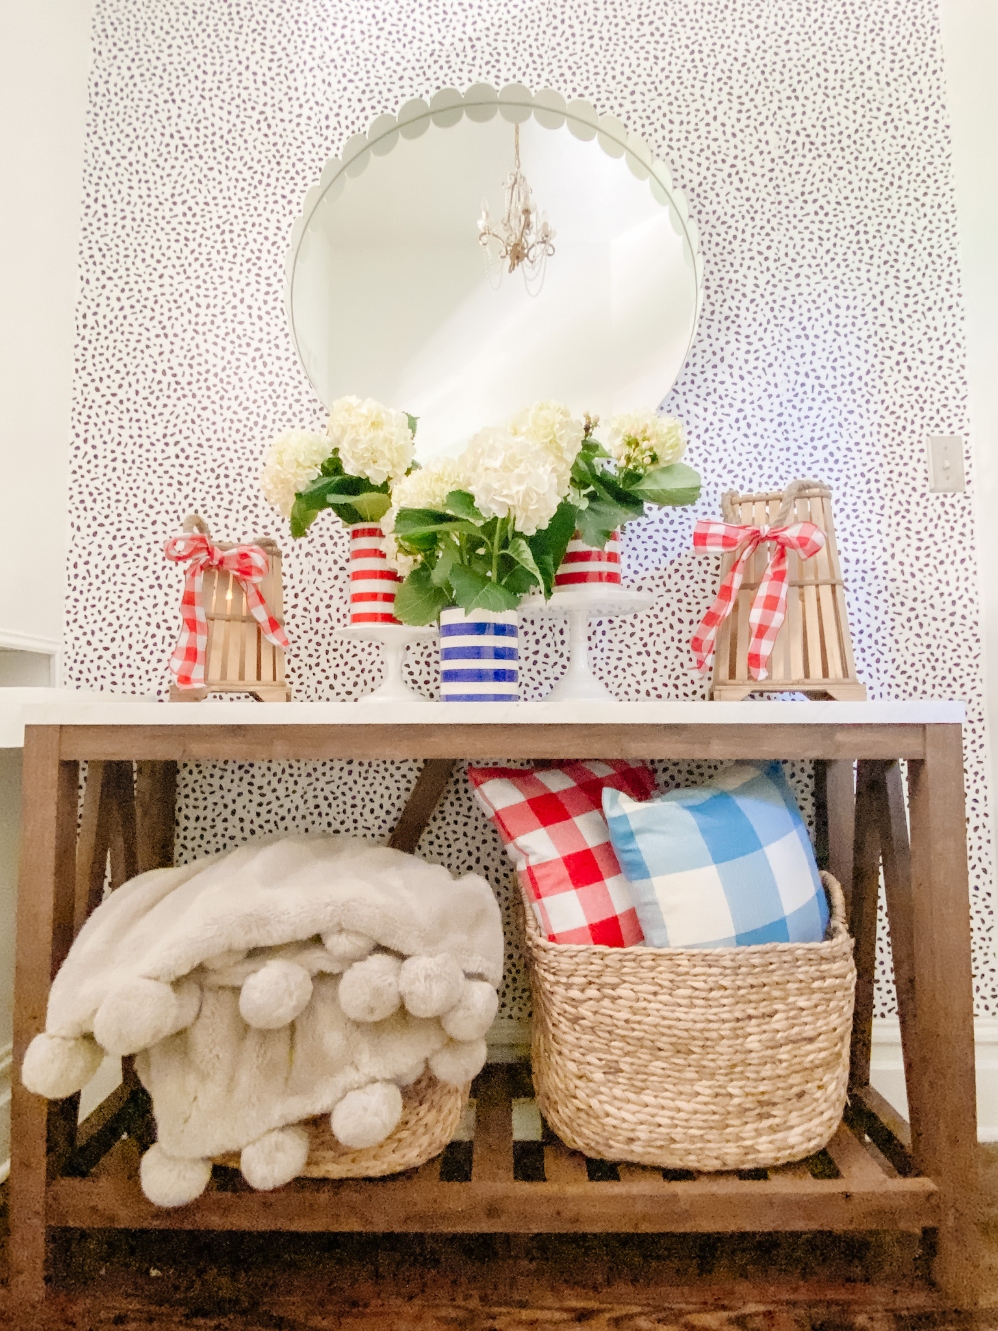 Summer Patriotic Entryway Table Decorating with gingham pillows and blue and red striped vases with hydrangeas. 